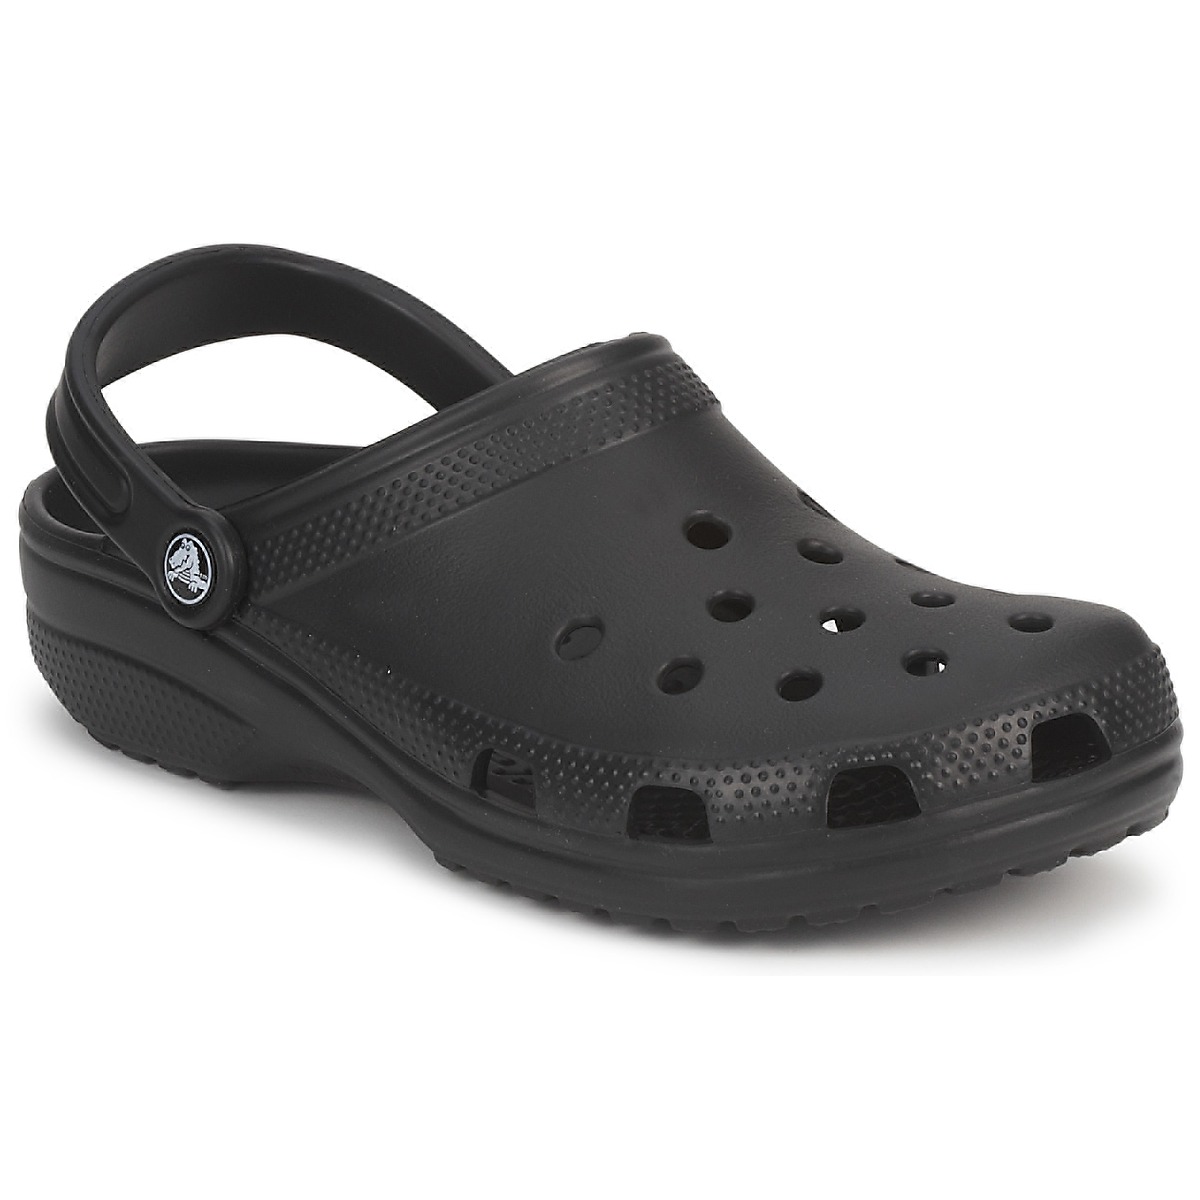 Clogs Crocs CLASSIC Black - Free Delivery with Rubbersole.co.uk ...